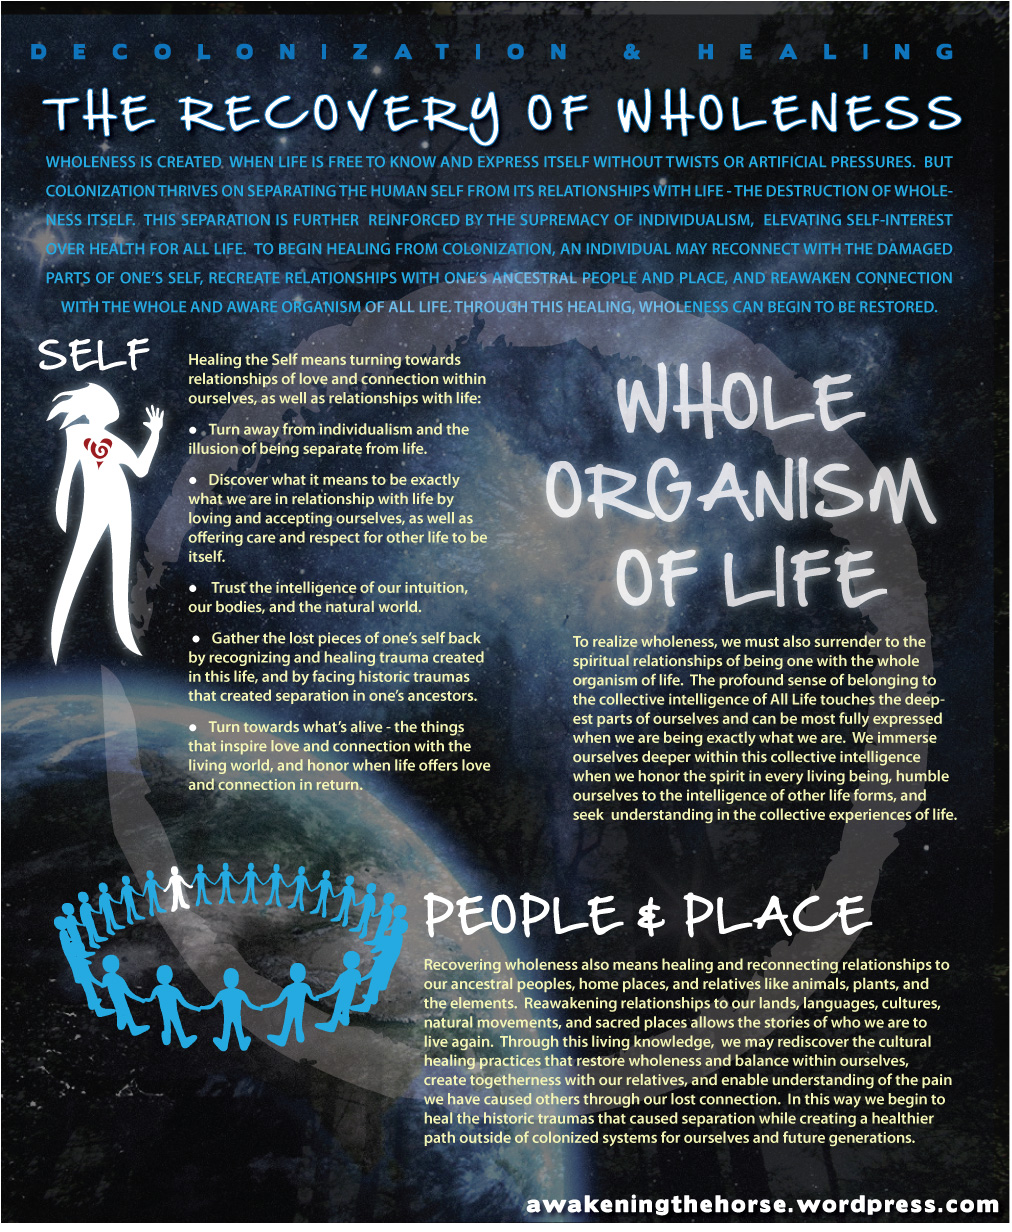 recoveryofwholeness